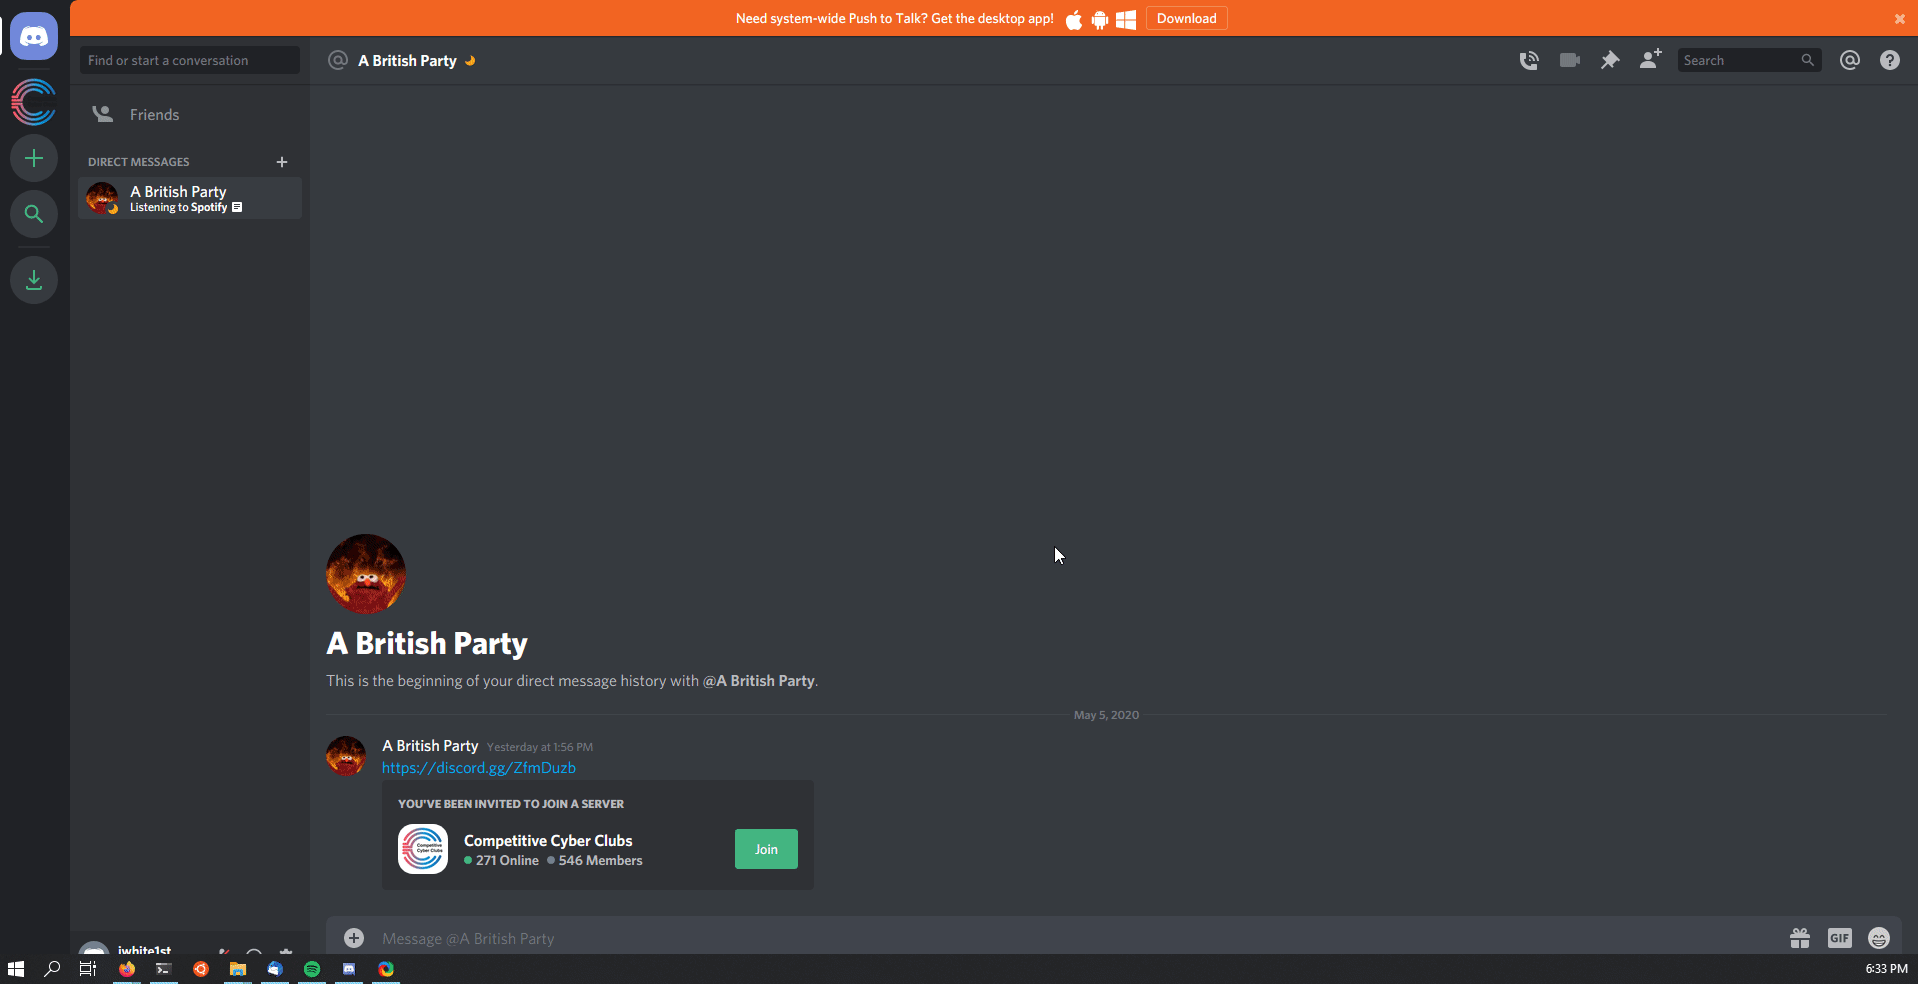 Demo GIF of interaction with Discord Bot